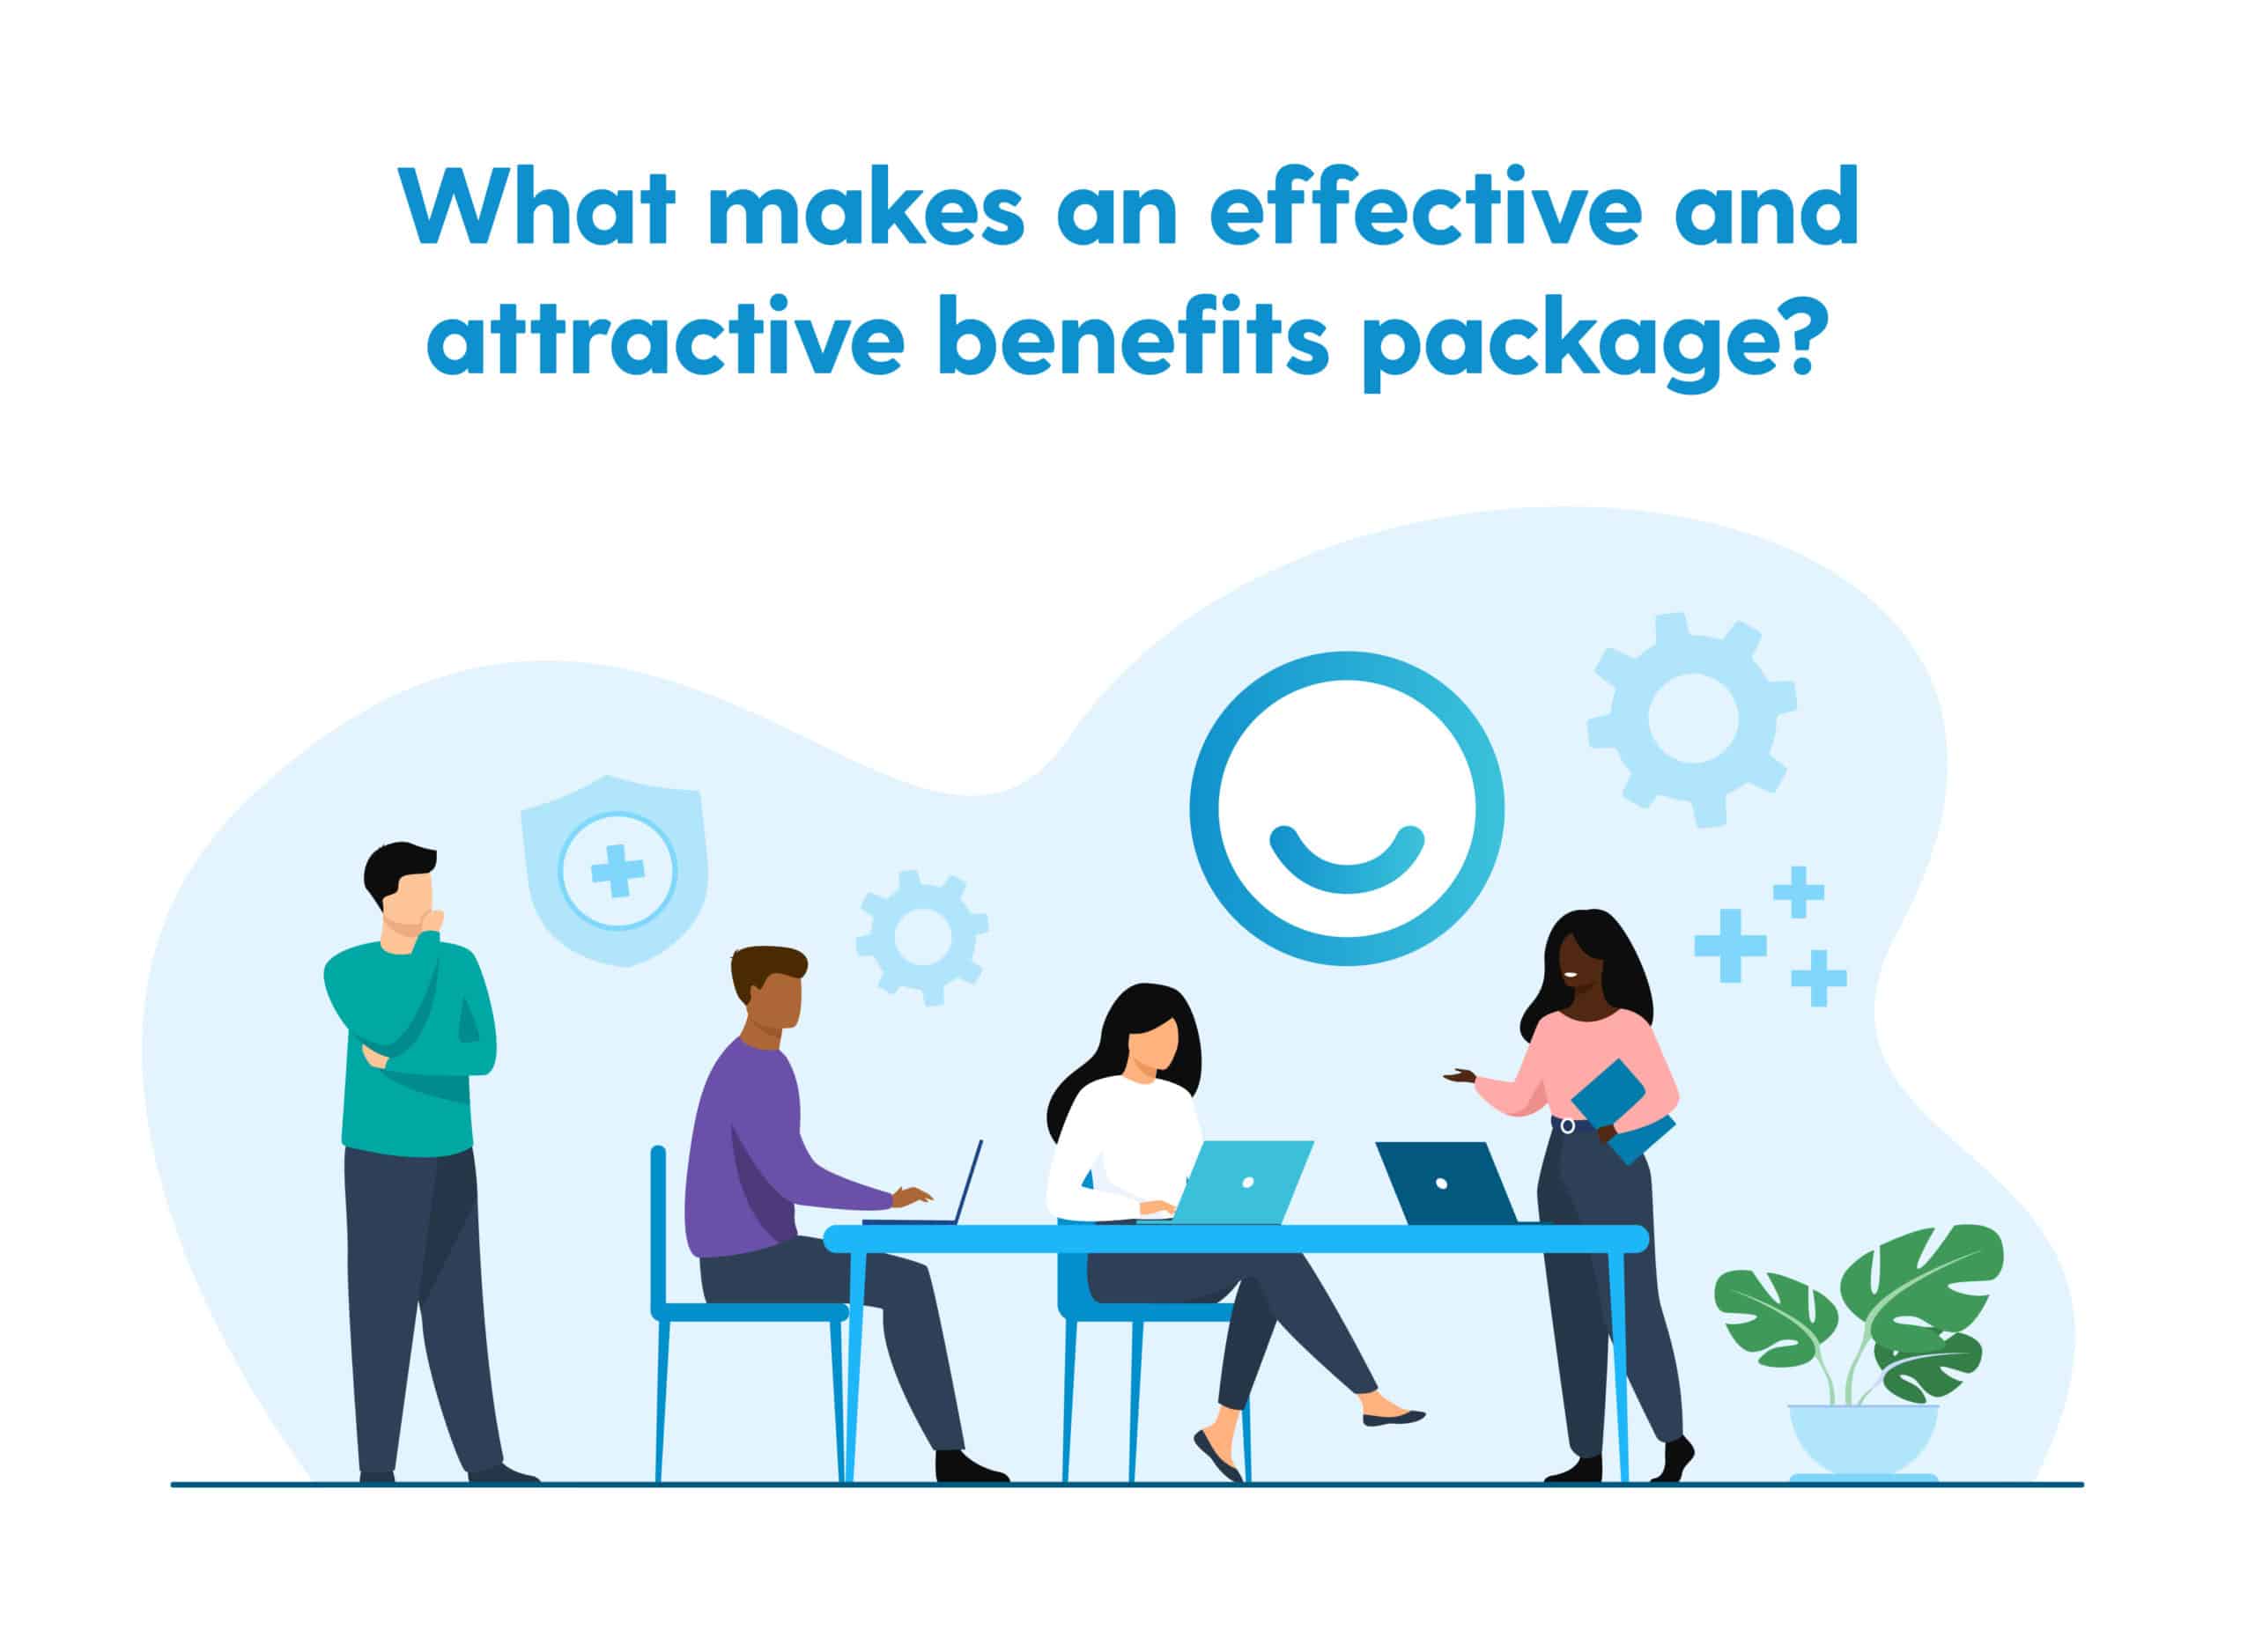 The ultimate guide to employee benefits in Malaysia